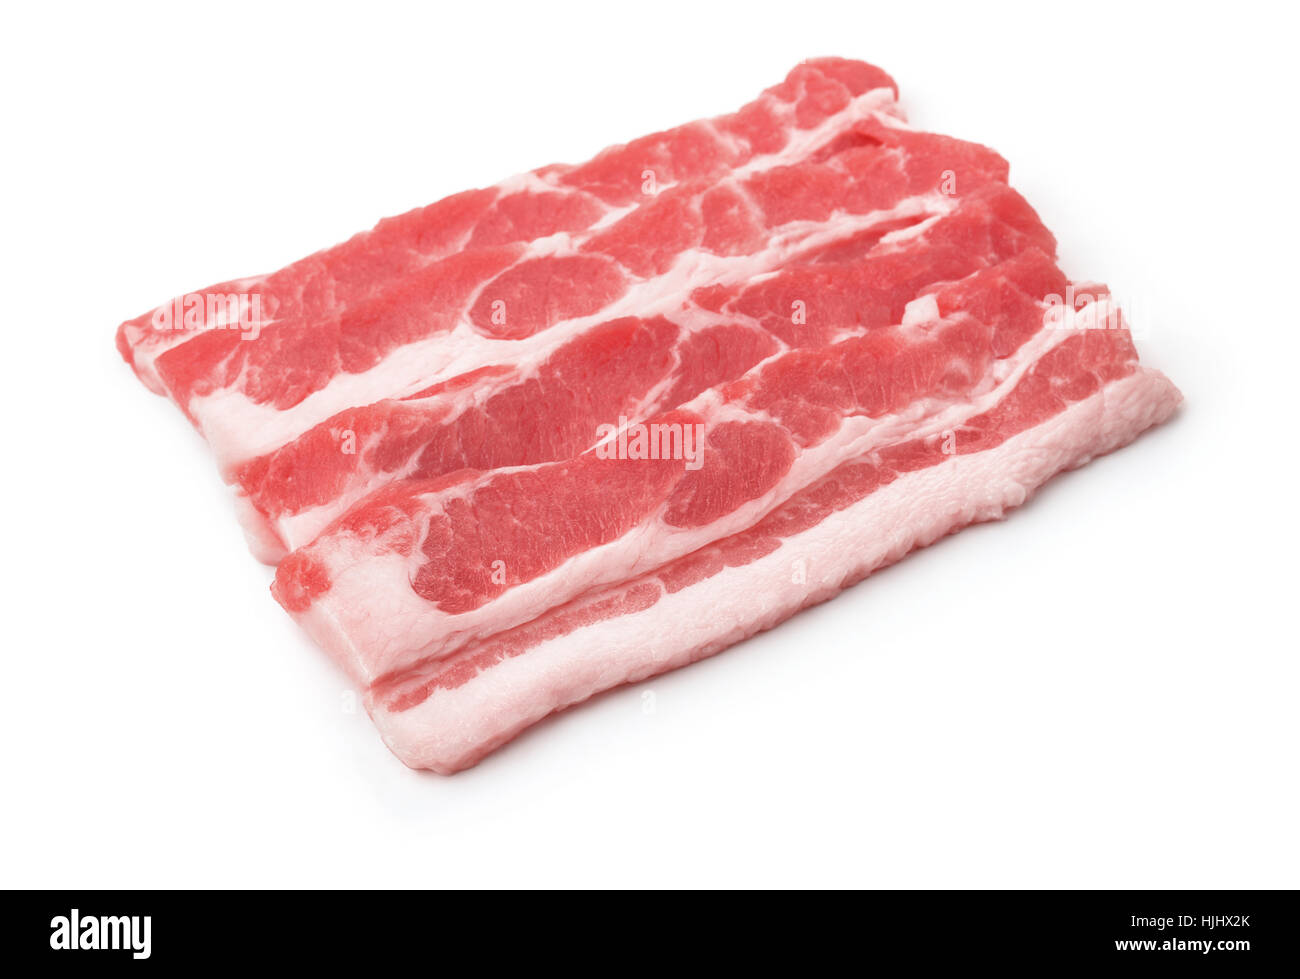 Les tranches de bacon cru isolated on white Banque D'Images